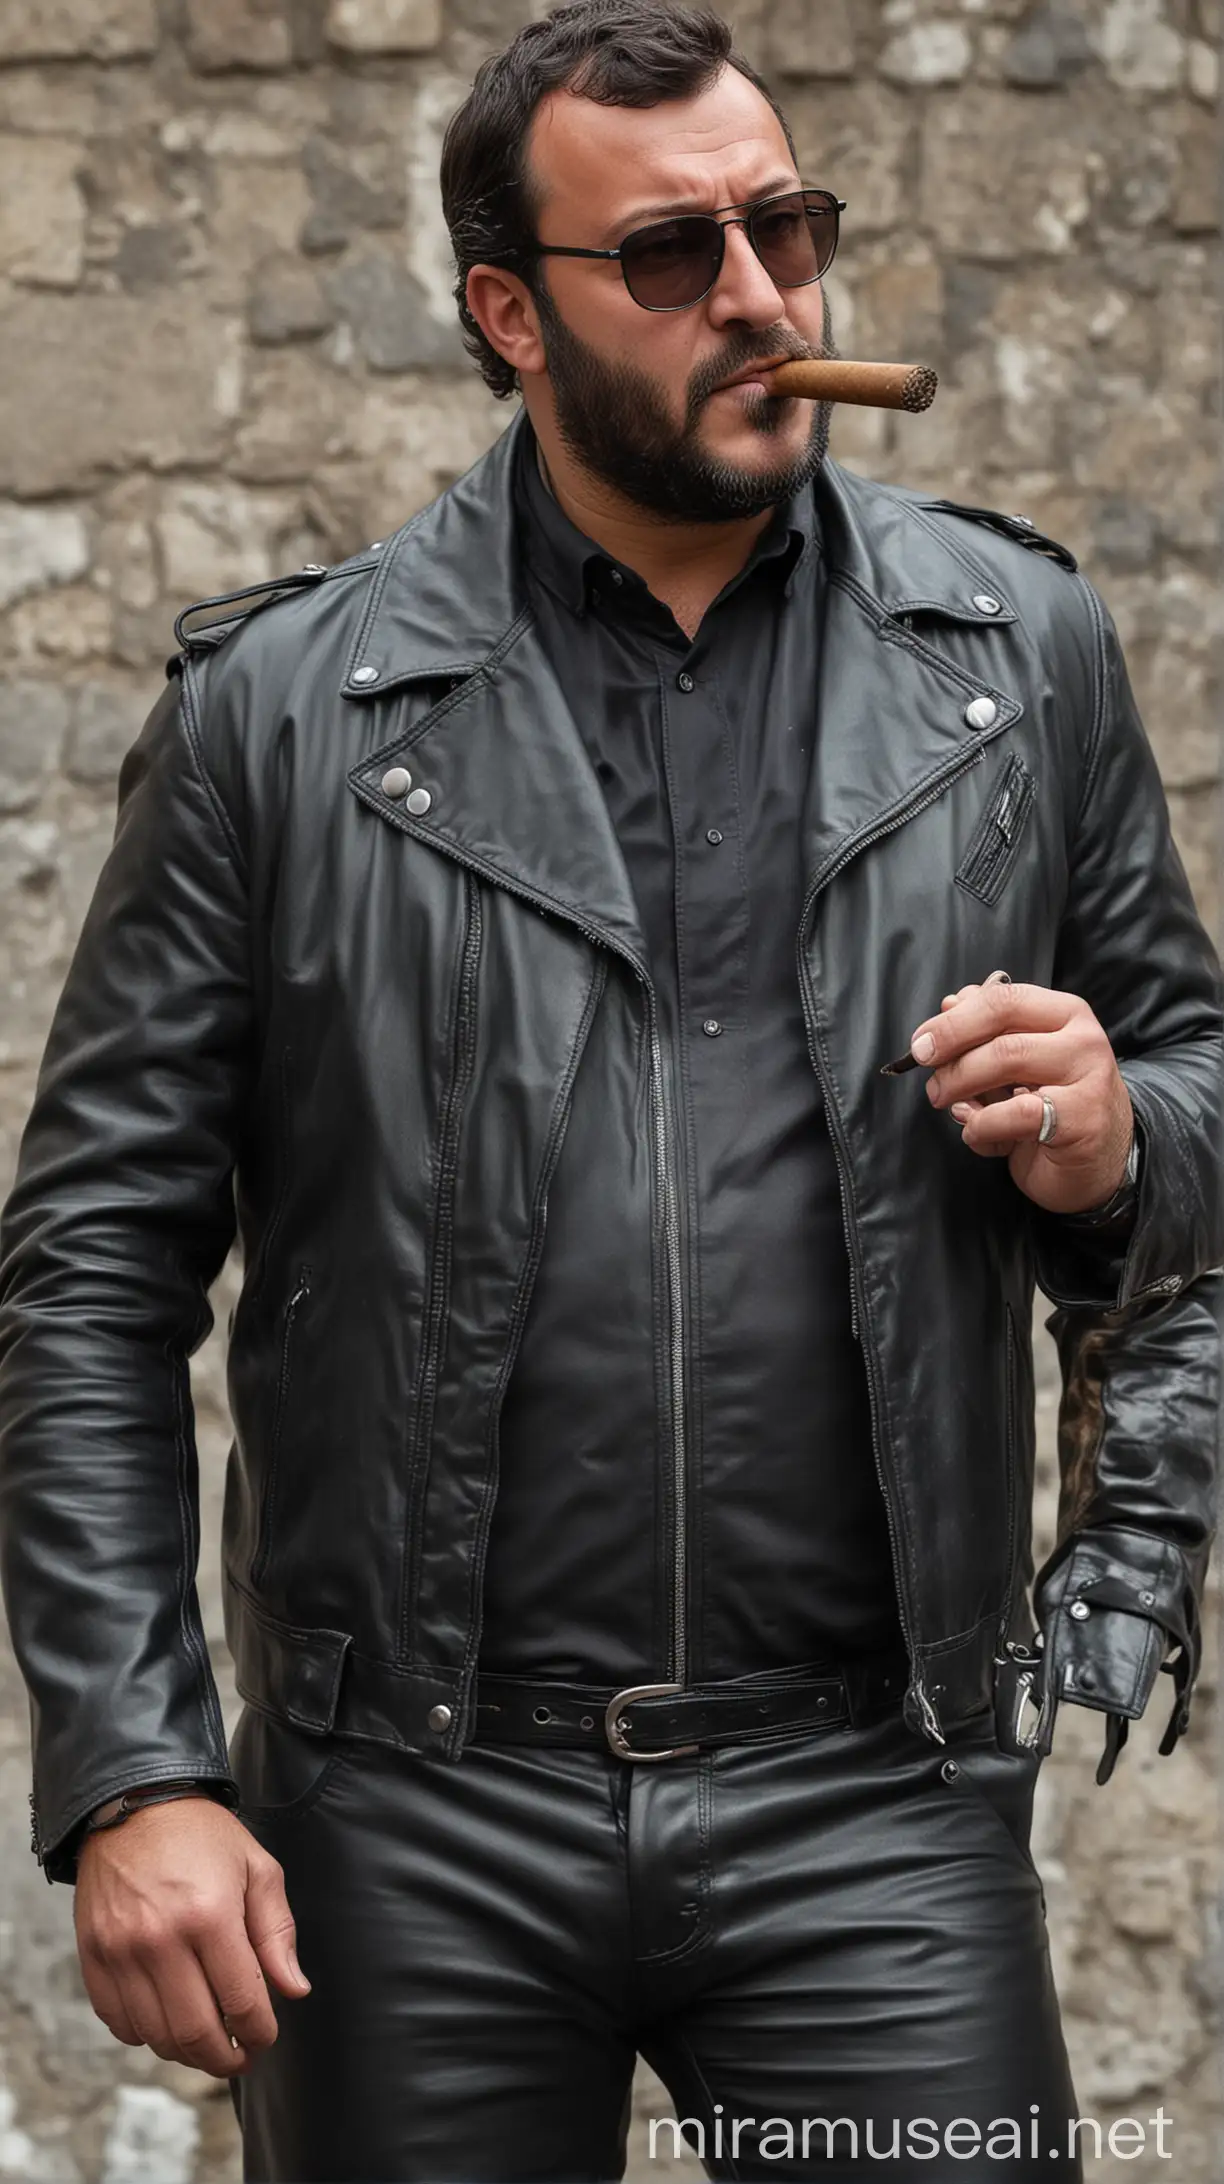 A manly thick muscled and bearded Matteo Salvini smoking a big cigar very tight black leather biker style dressed jacket and pants wearing glasses with big crotch